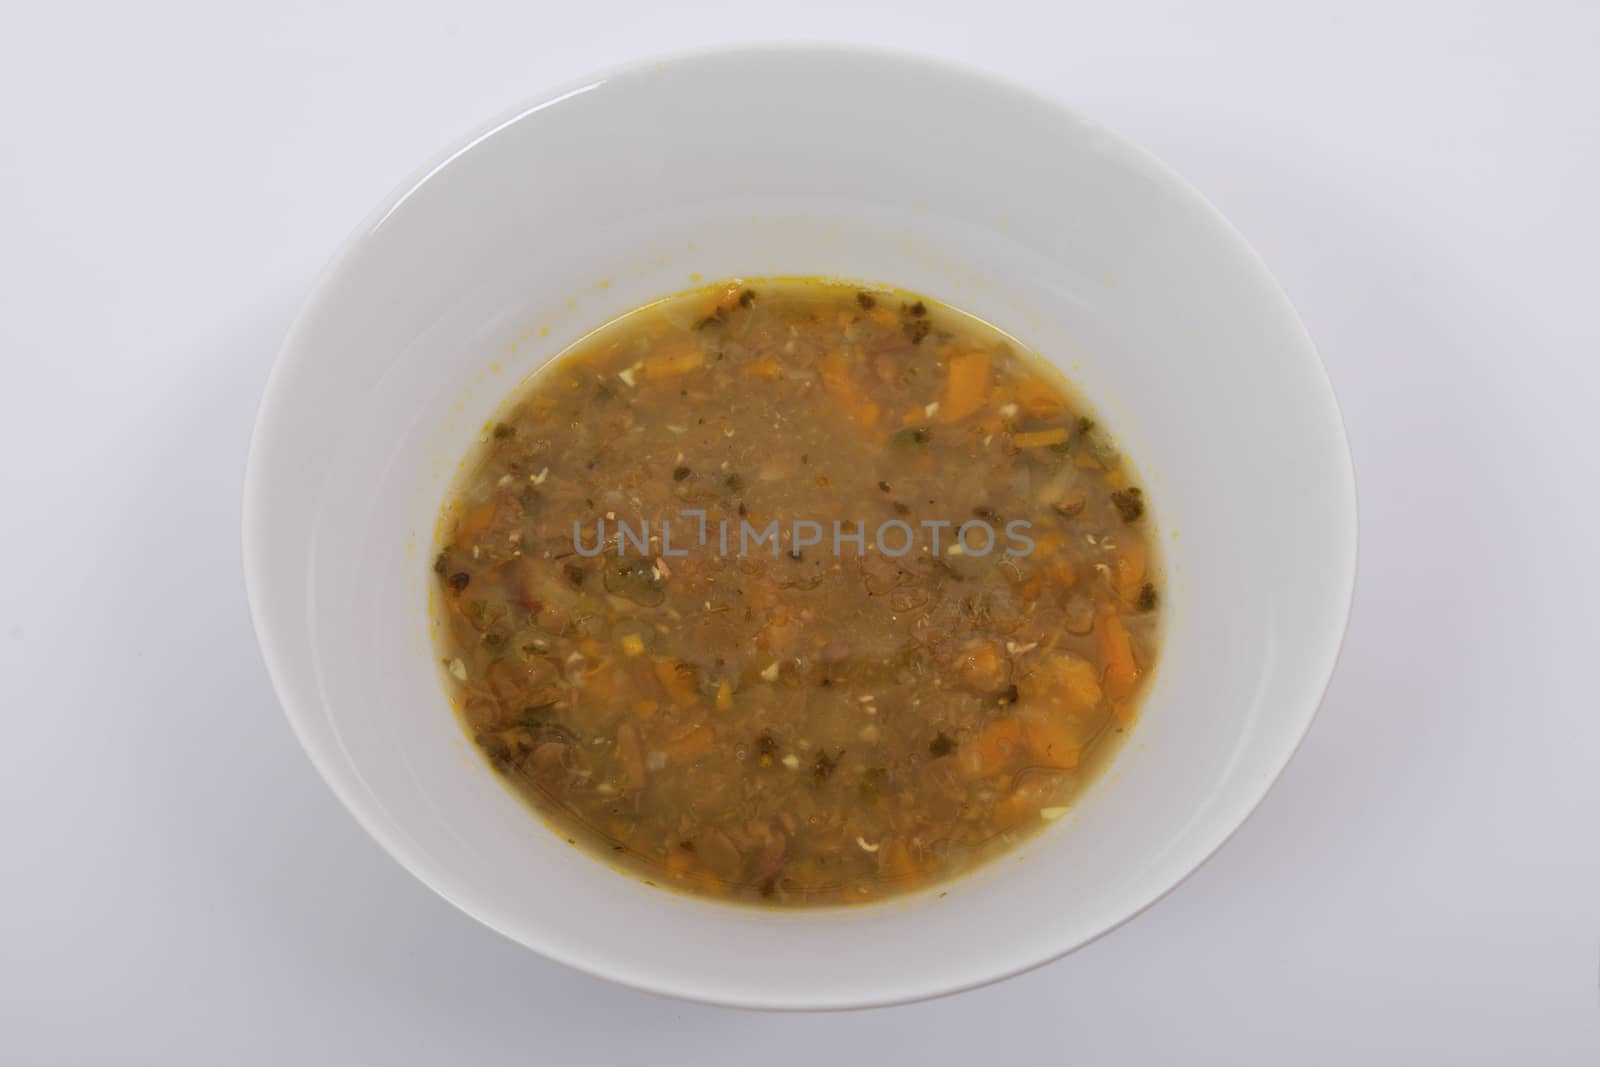 Lentil soup with carrot on a white by neryx